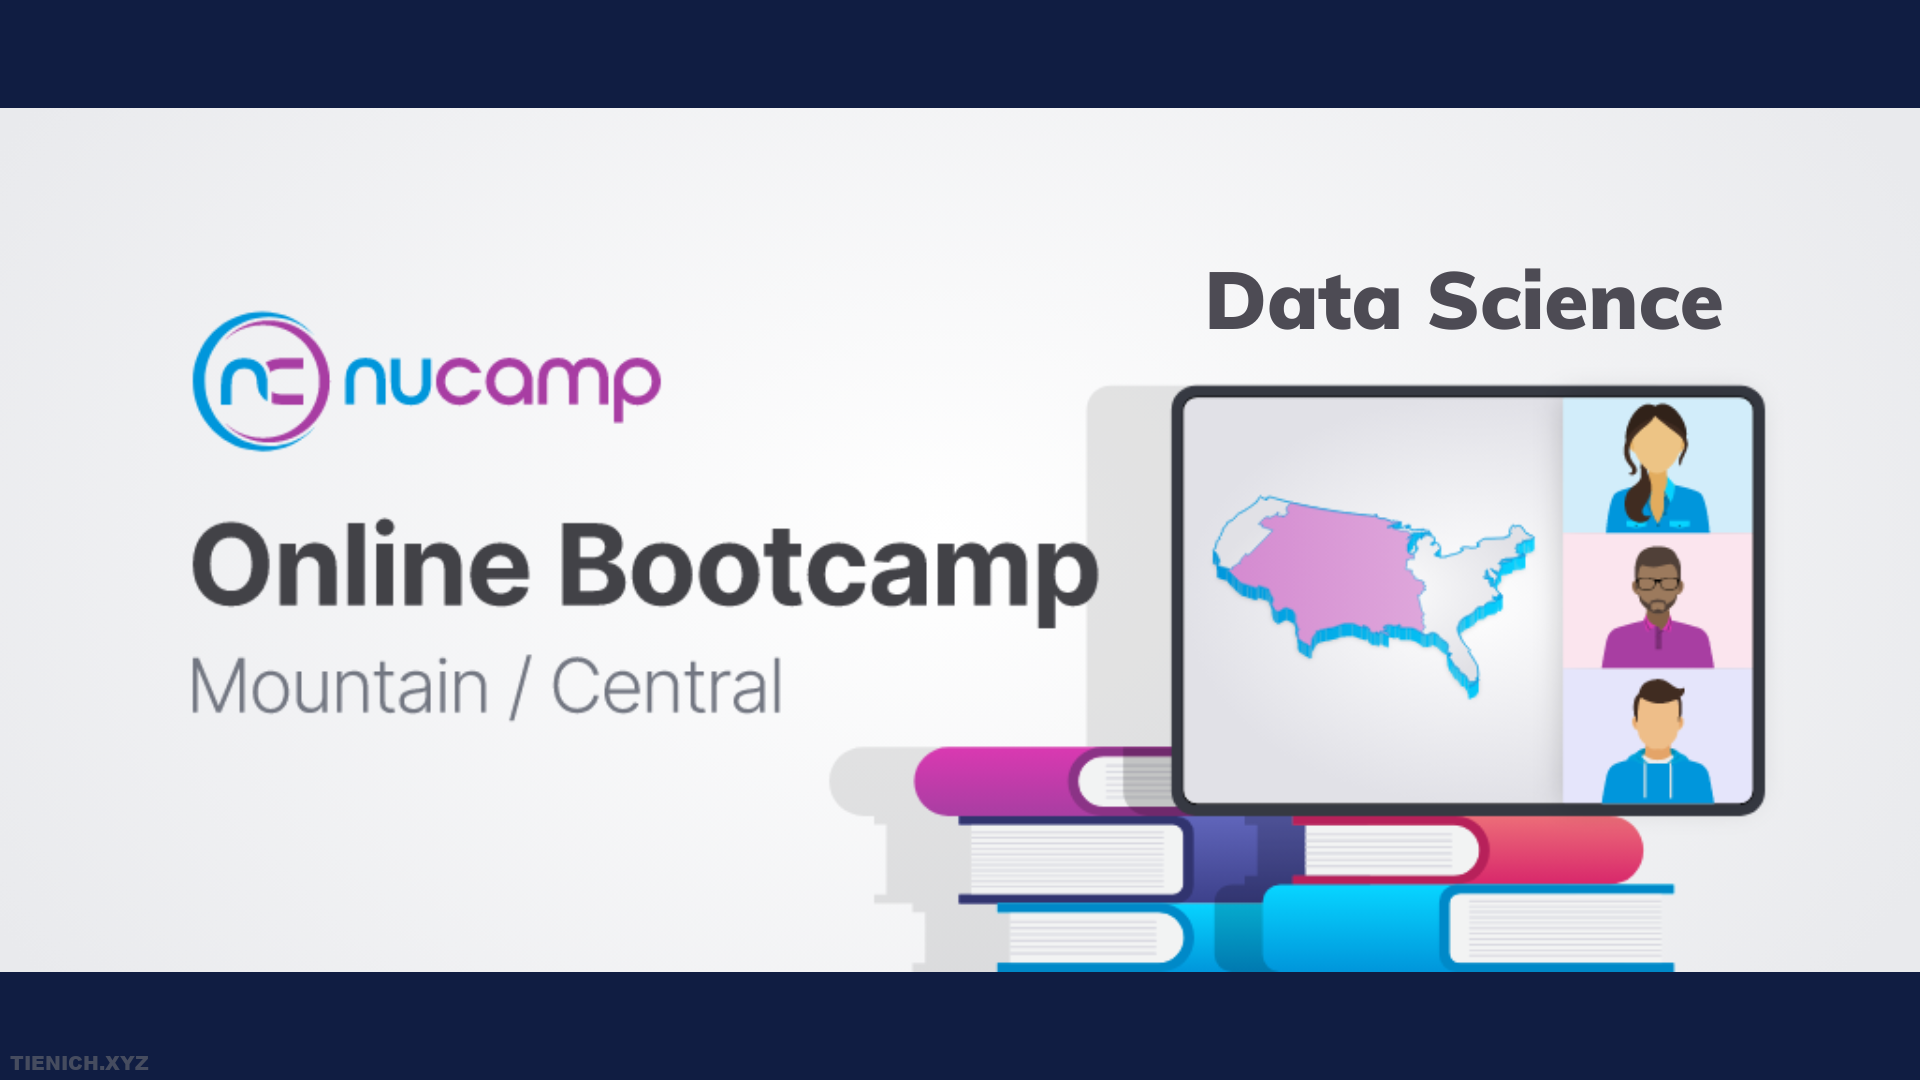 Nucamp Data Science Bootcamp